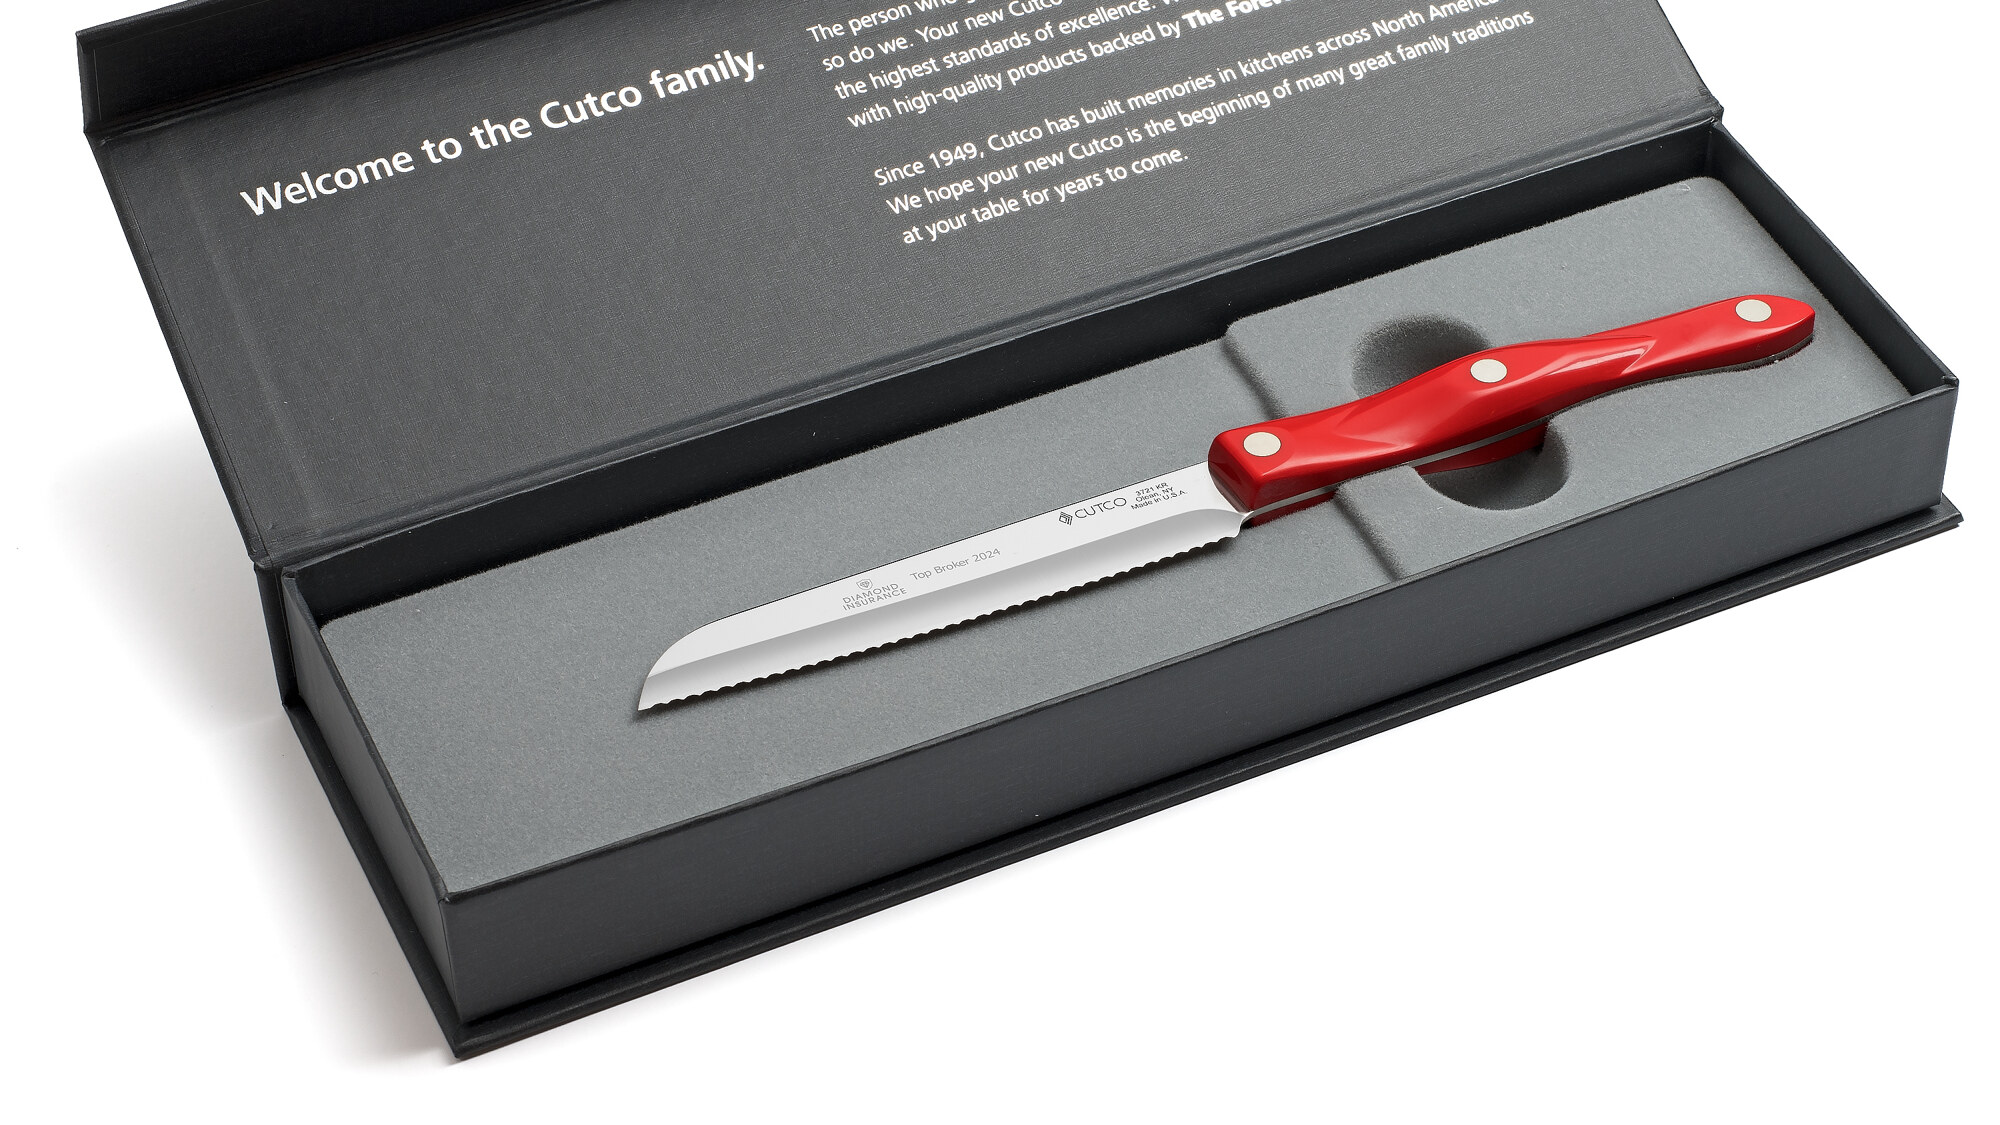 2 Products - Santoku-Style Trimmer Product in Deluxe Gift Box